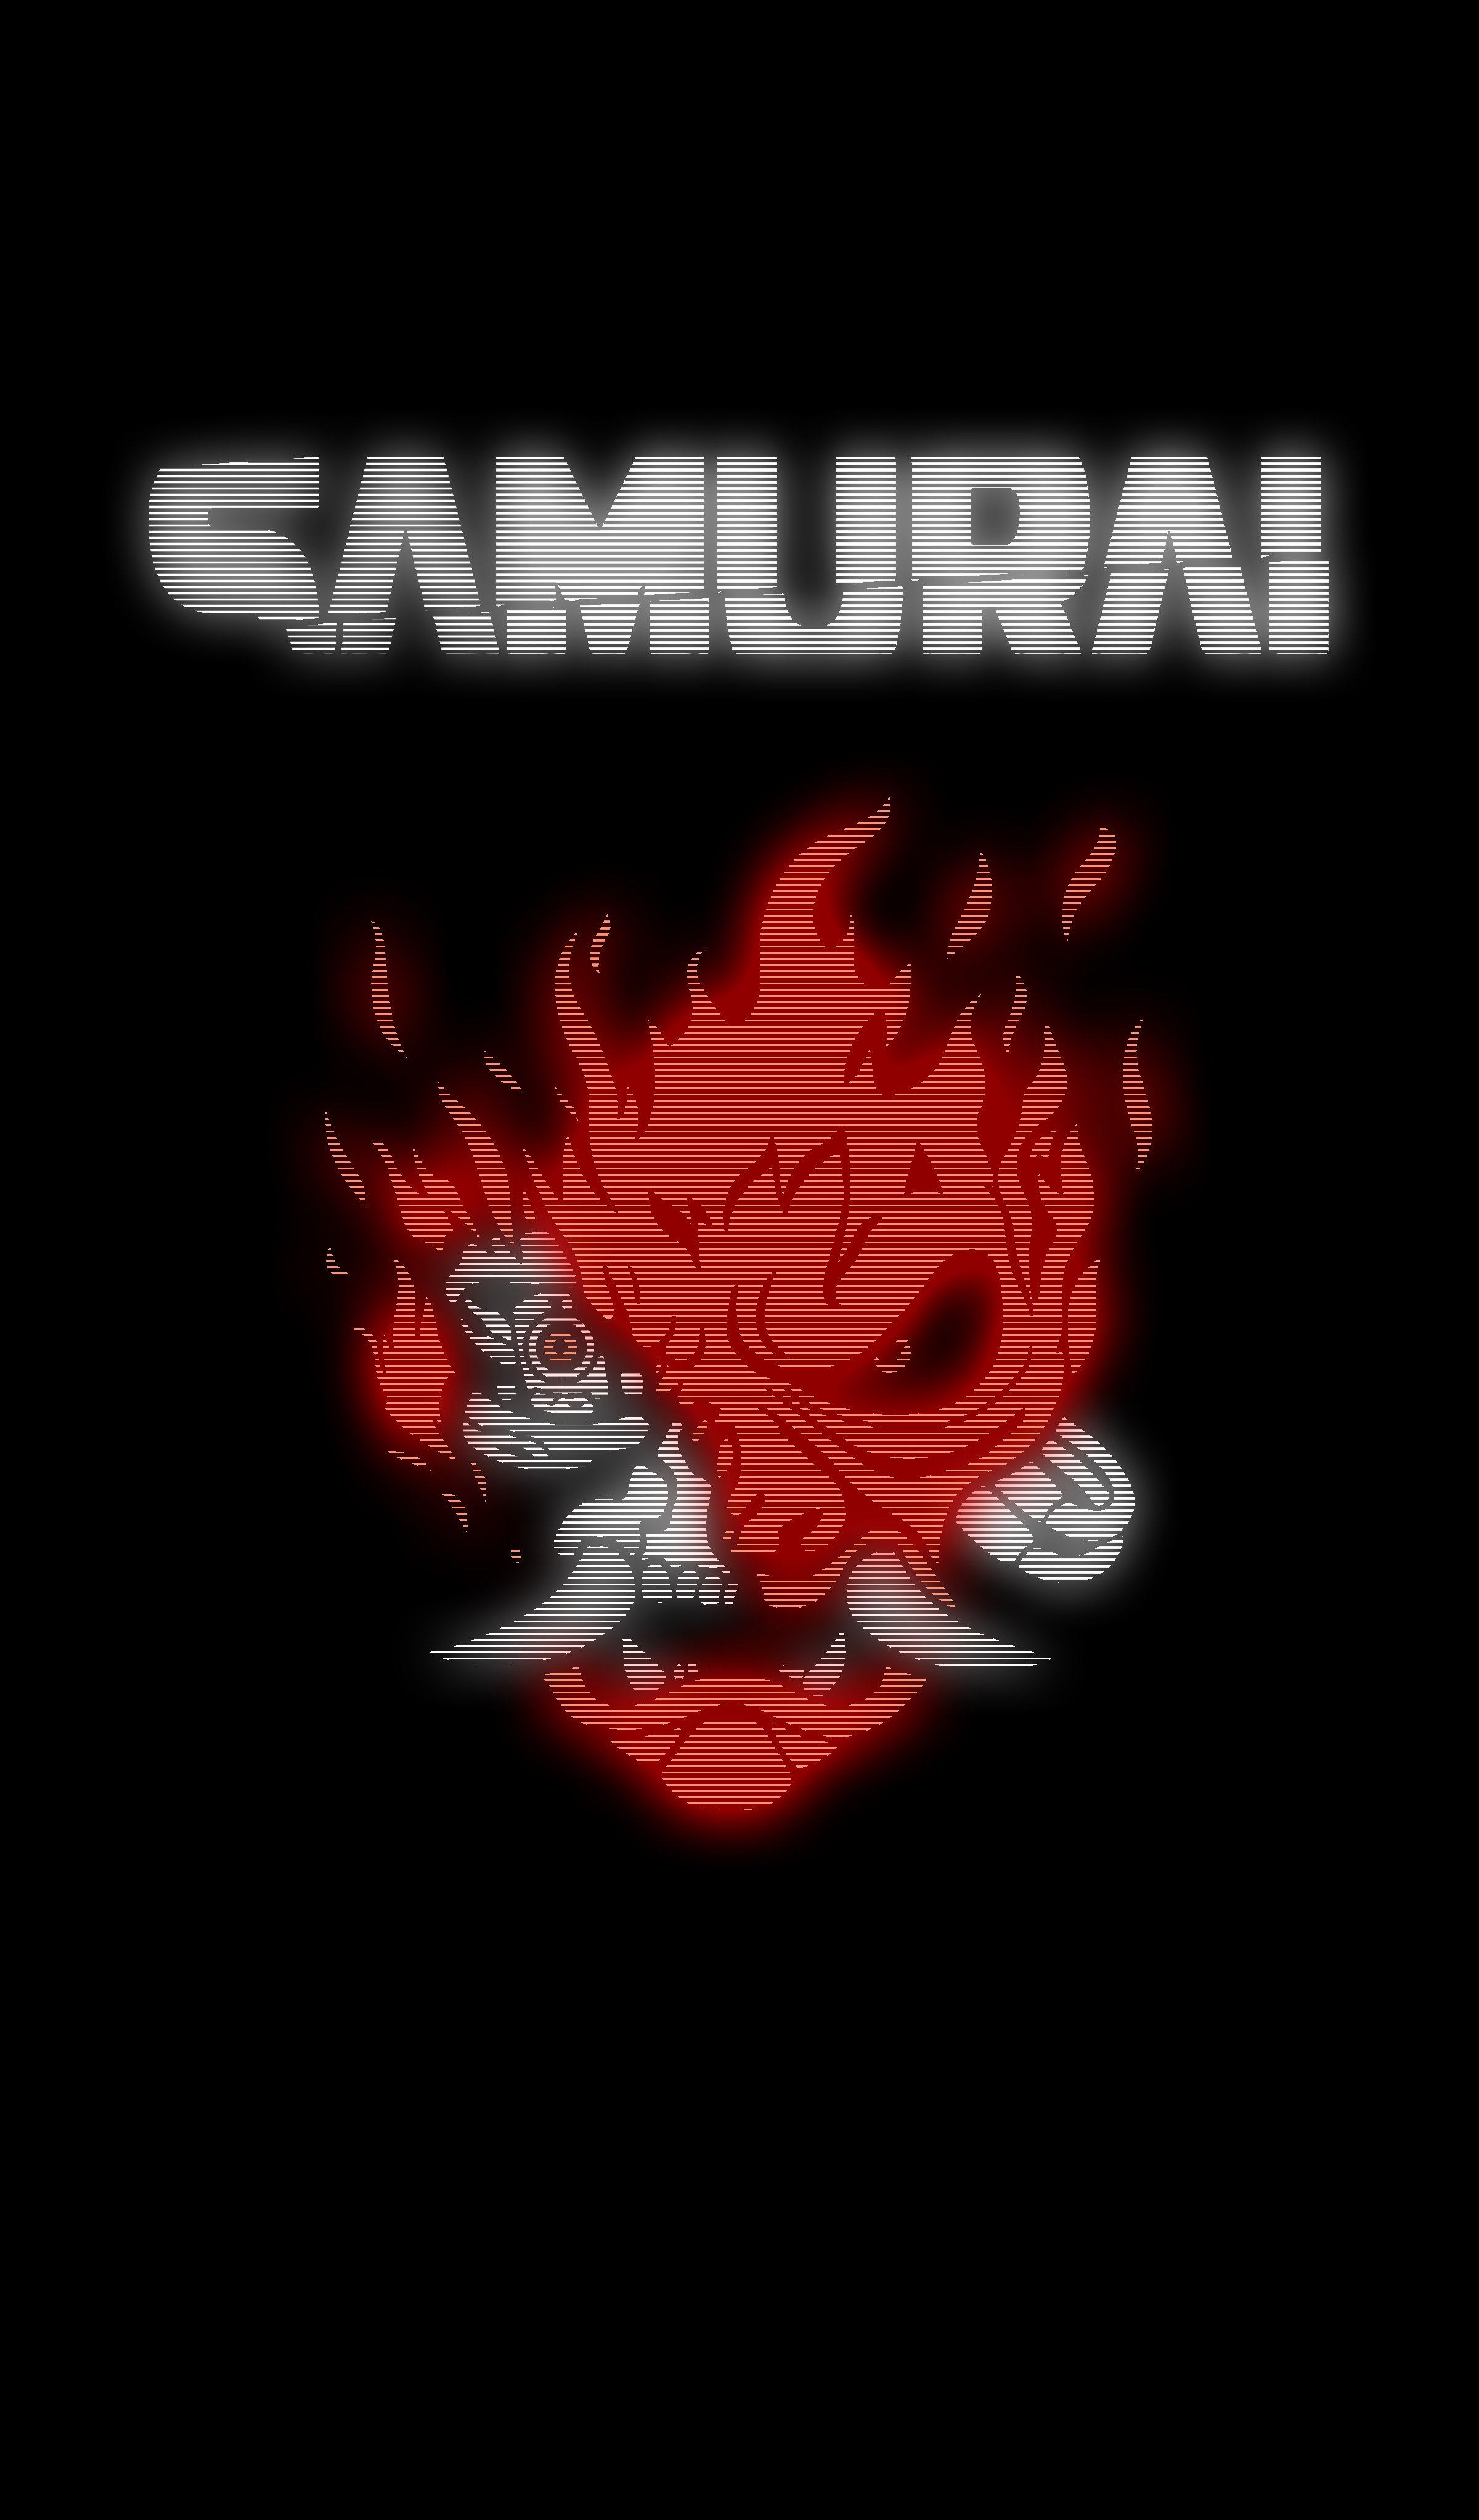 Made some custom Samurai mobile wallpaper. The link to them all will be in the comments, enjoy!